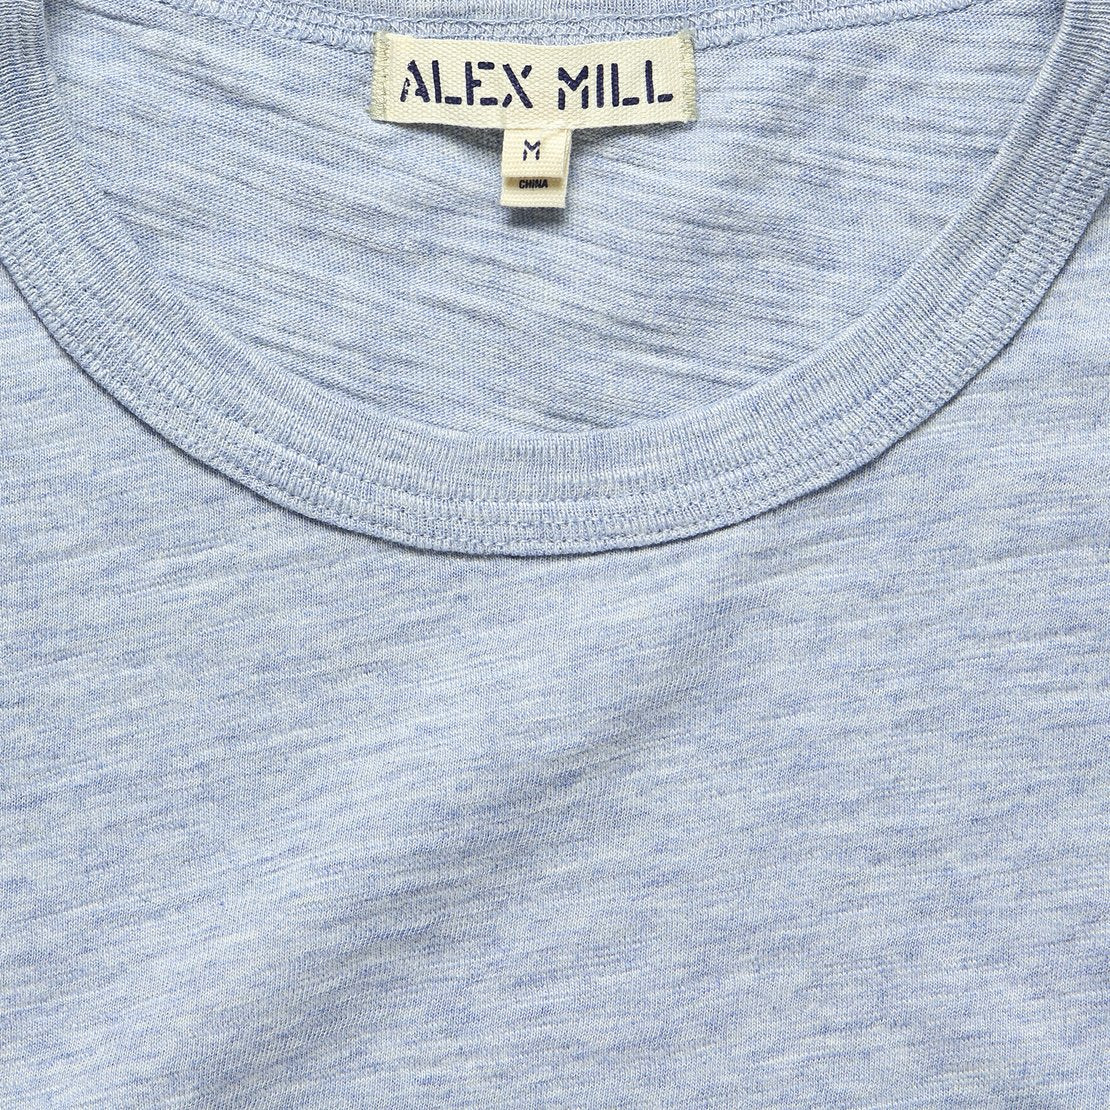 Standard Crew Tee - Heather Sky - Alex Mill - STAG Provisions - Tops - S/S Tee